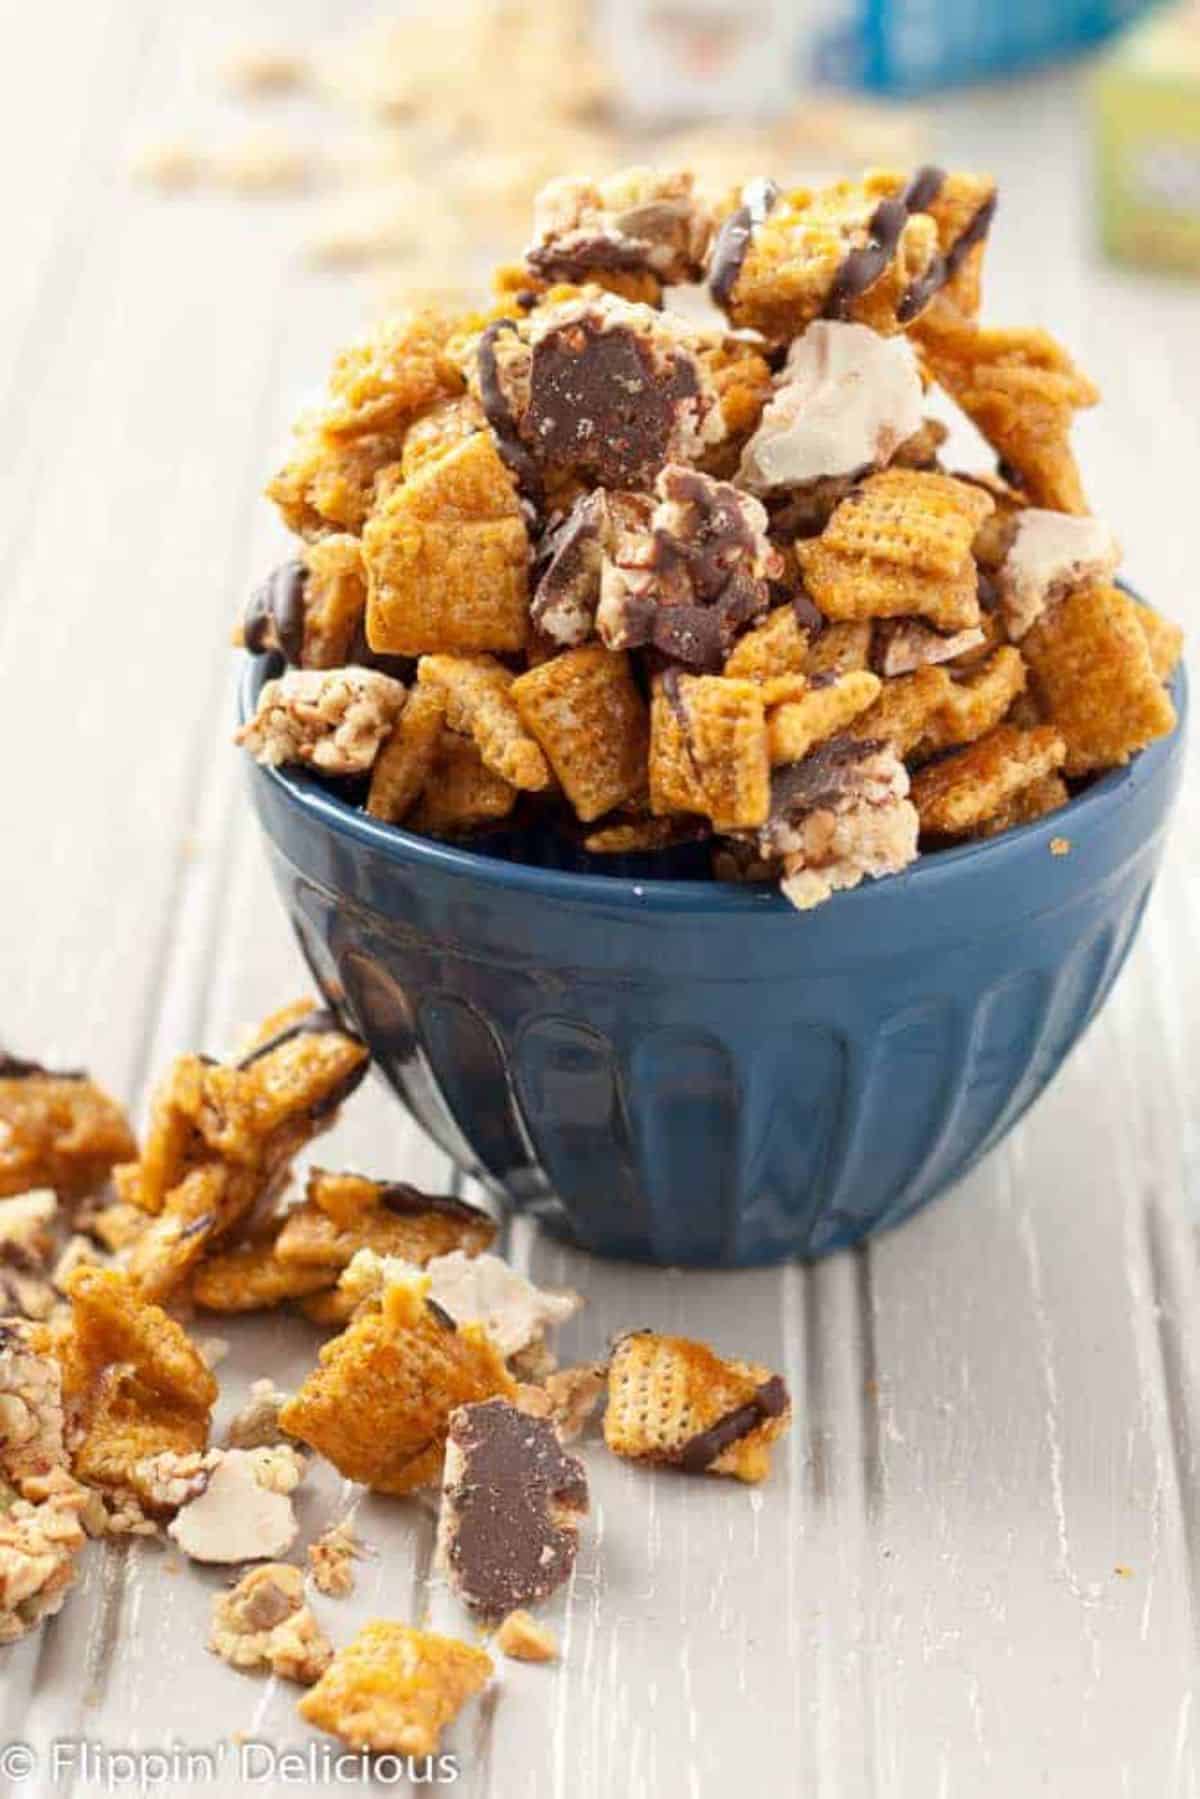 Delicious Salted Caramel Chocolate Chex Mix in a blue bowl.